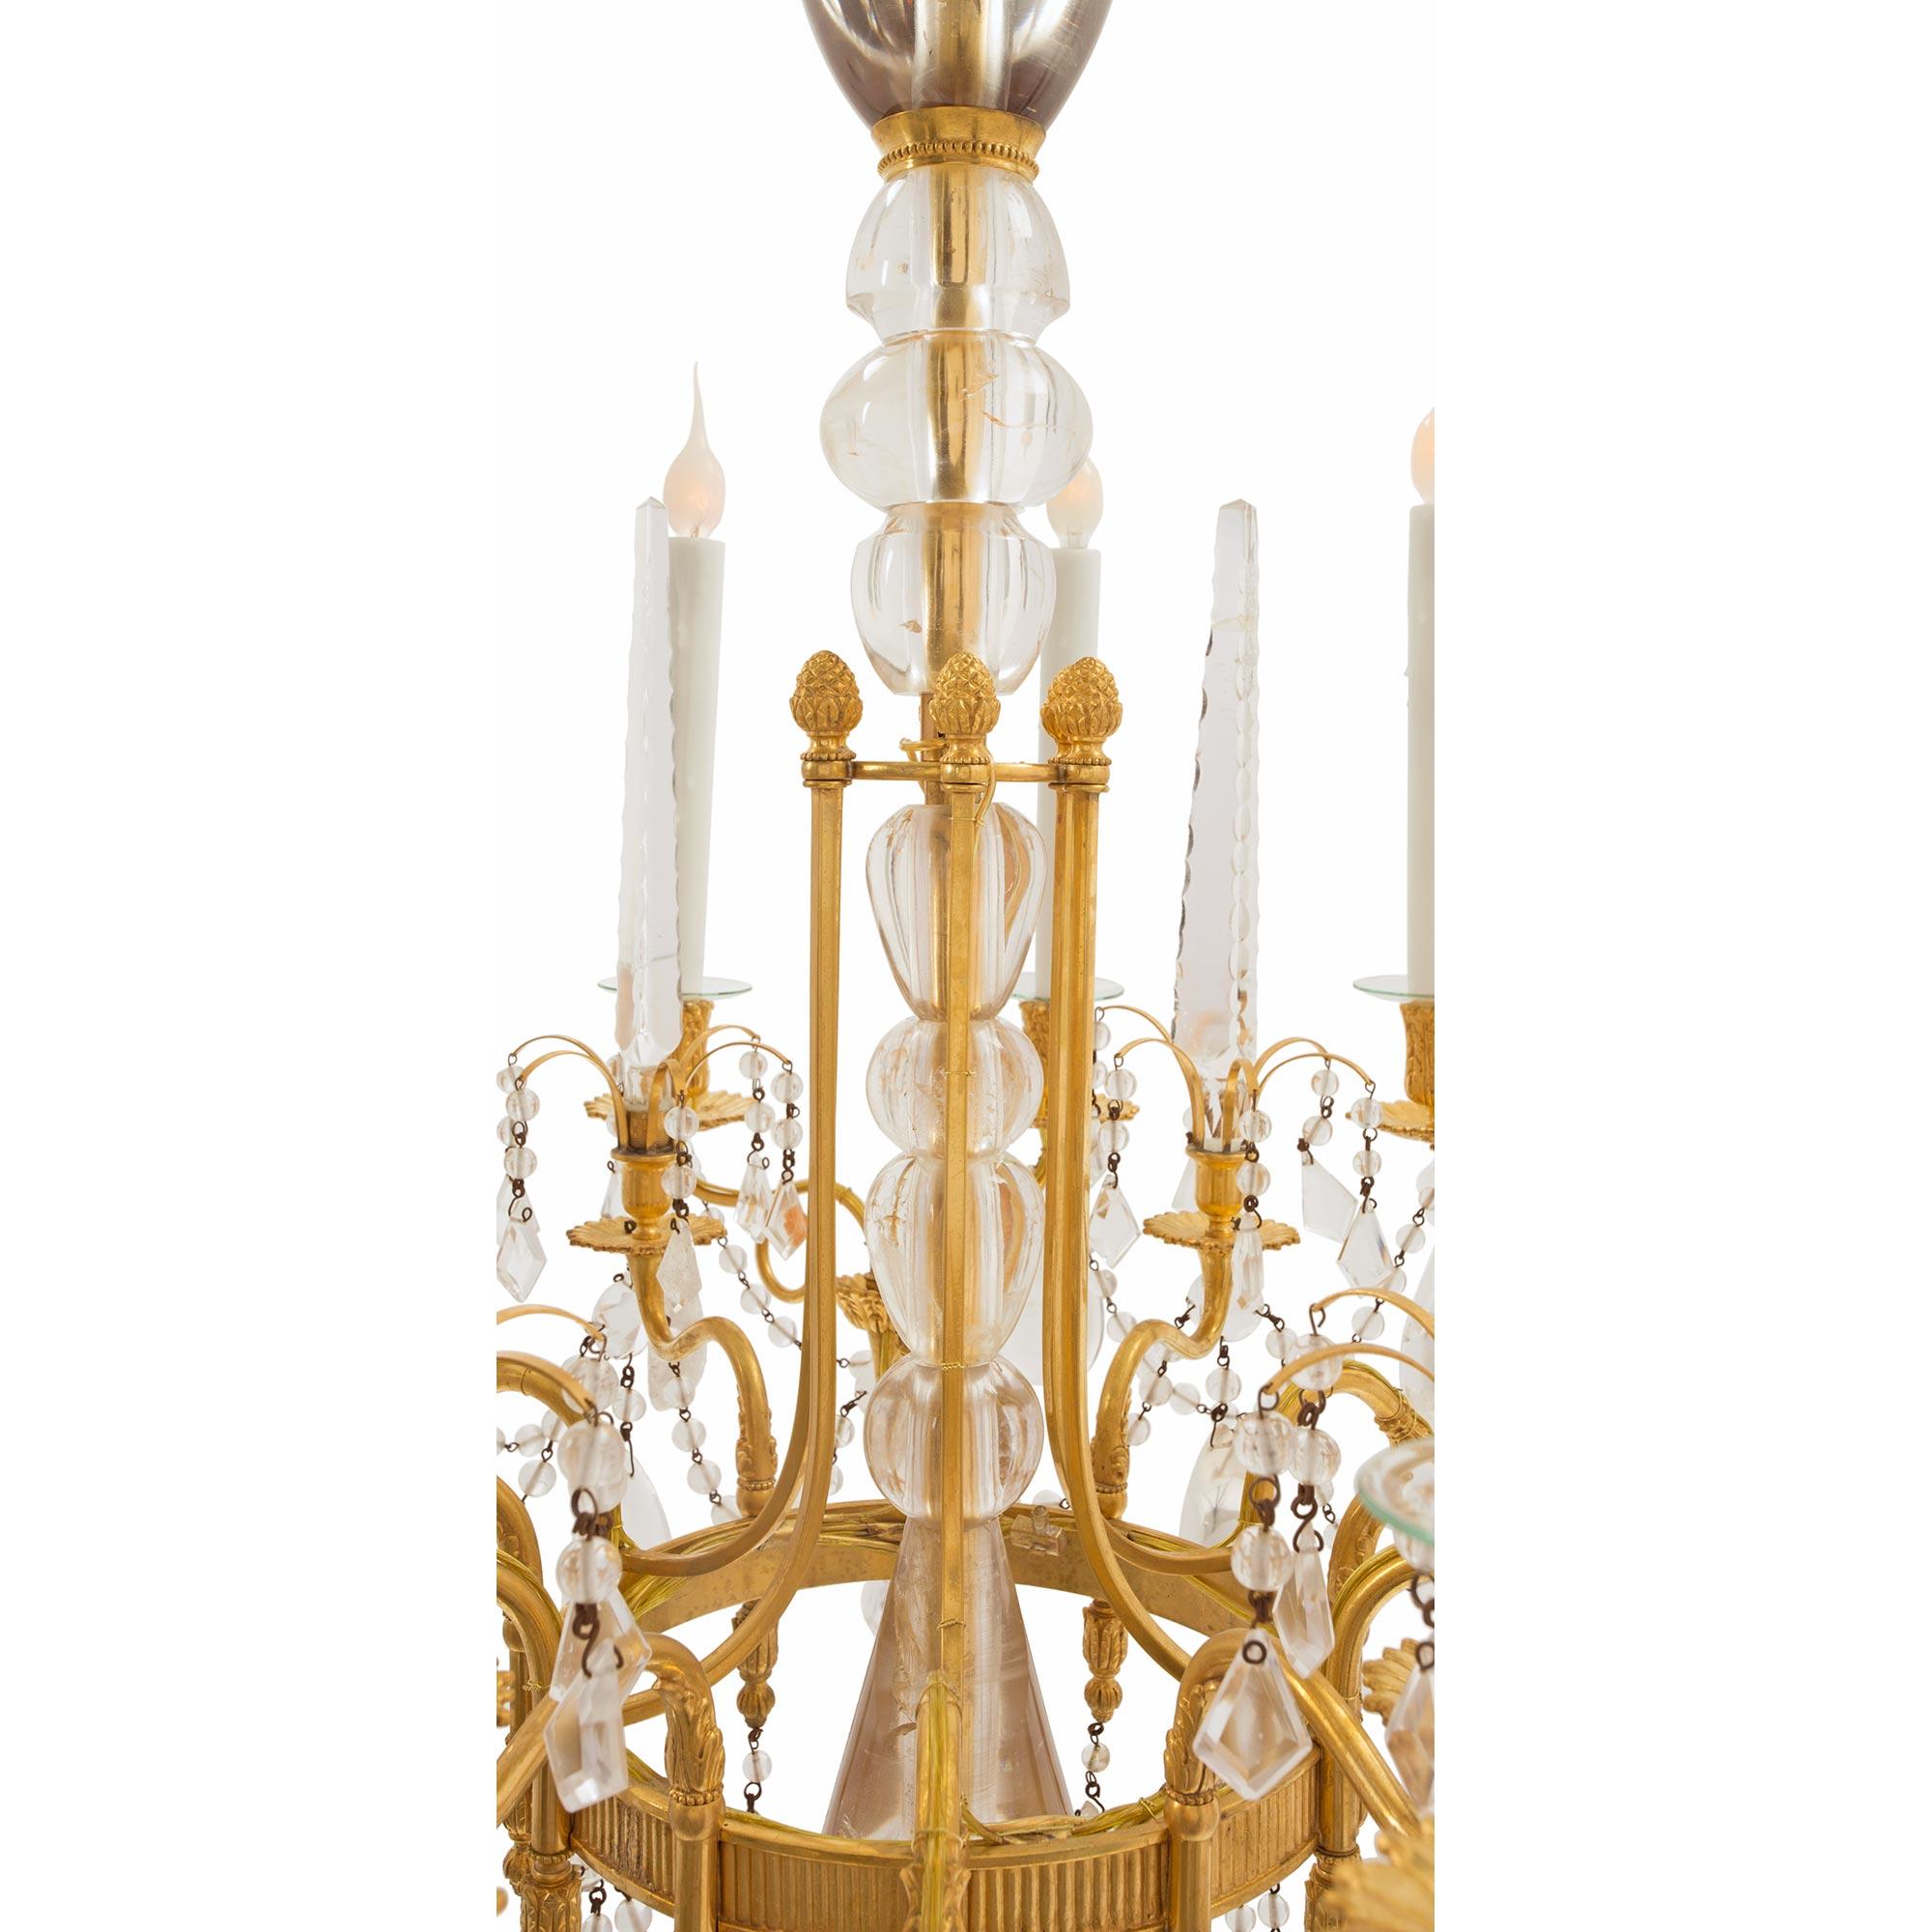 Russian Imperial 19th Century Neoclassical Style Rock Crystal Chandelier In Good Condition For Sale In West Palm Beach, FL